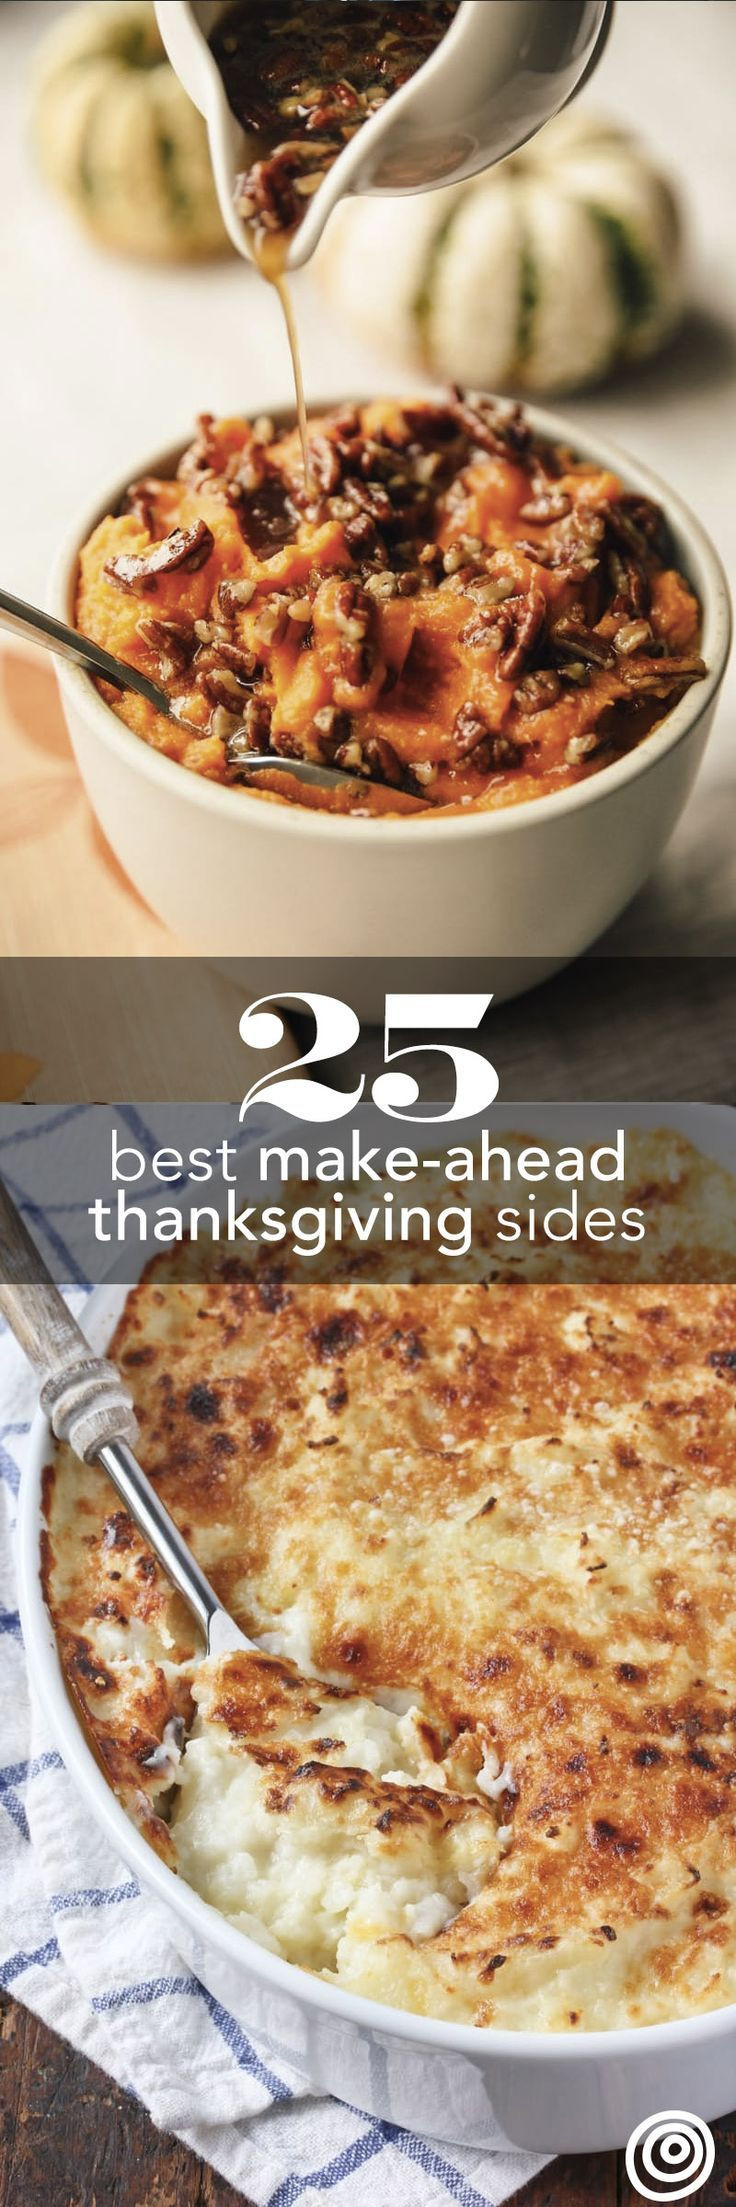 Make Ahead Sides For Thanksgiving
 25 Thanksgiving Side Dishes You Can Make Ahead of Time